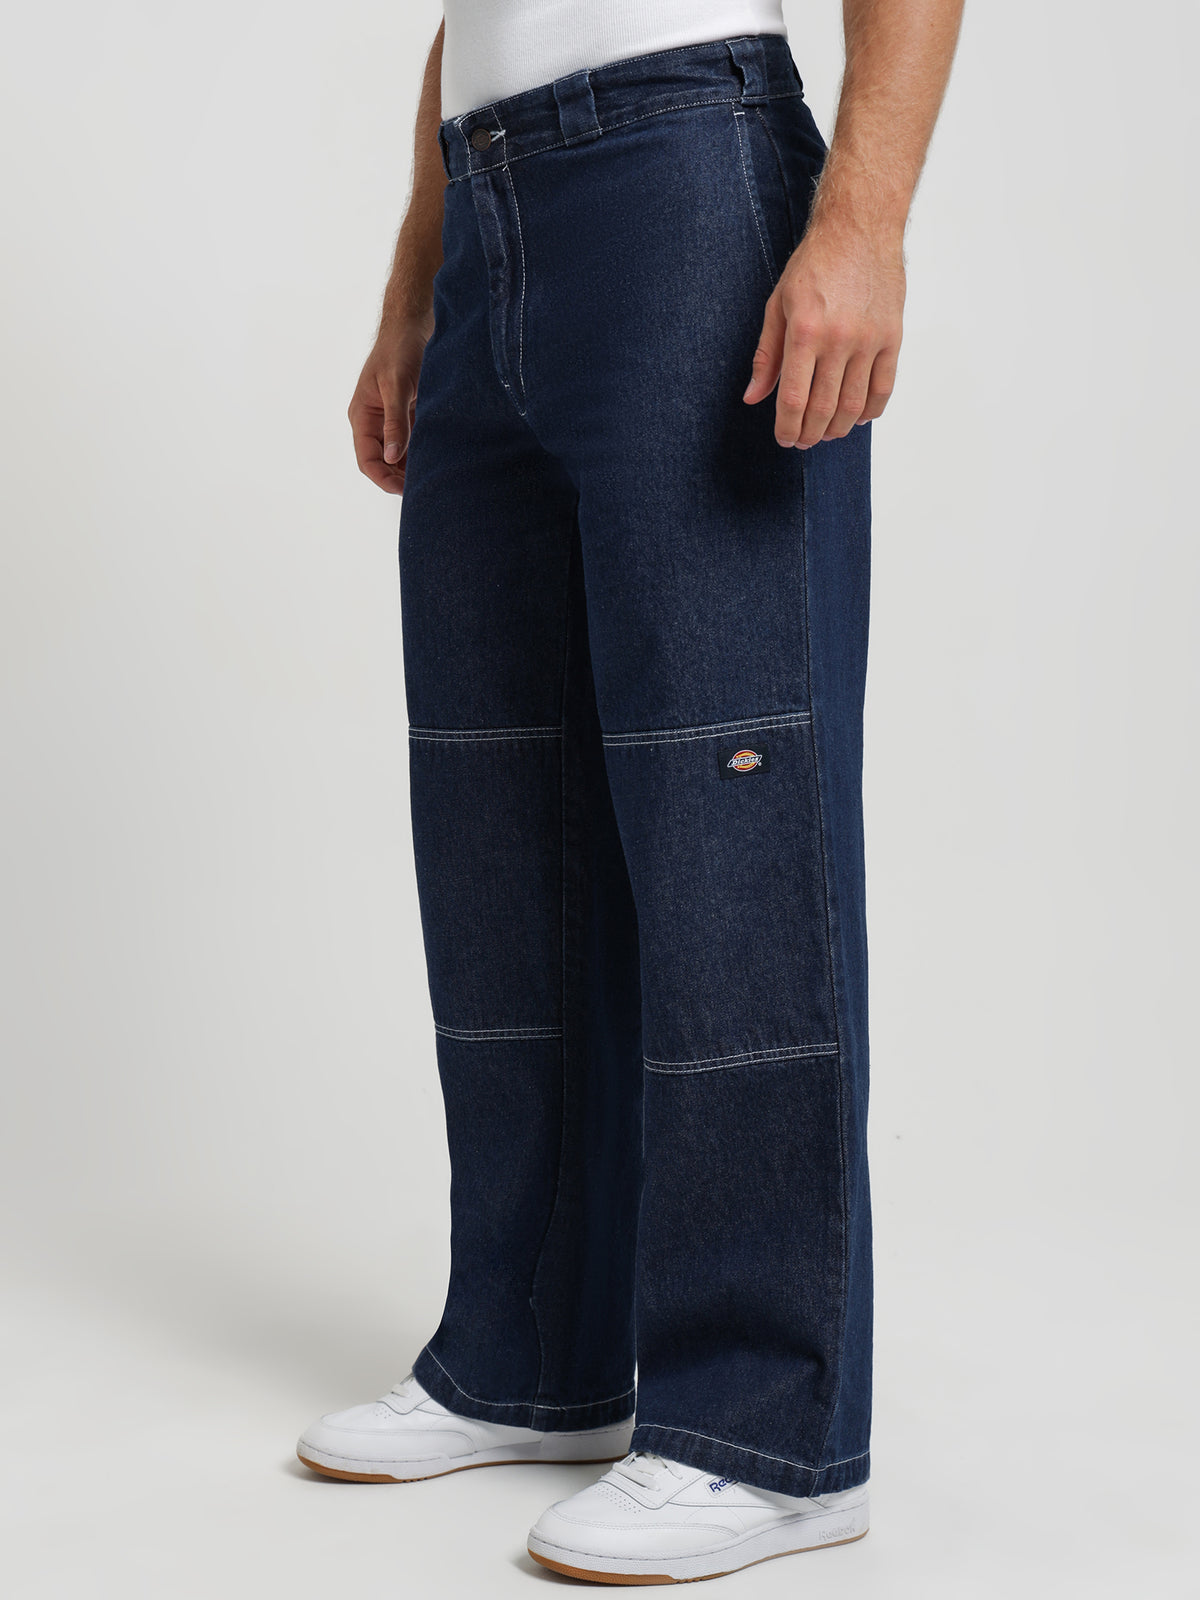 85-283AU Double Knee Jeans in Rinsed Indigo Blue